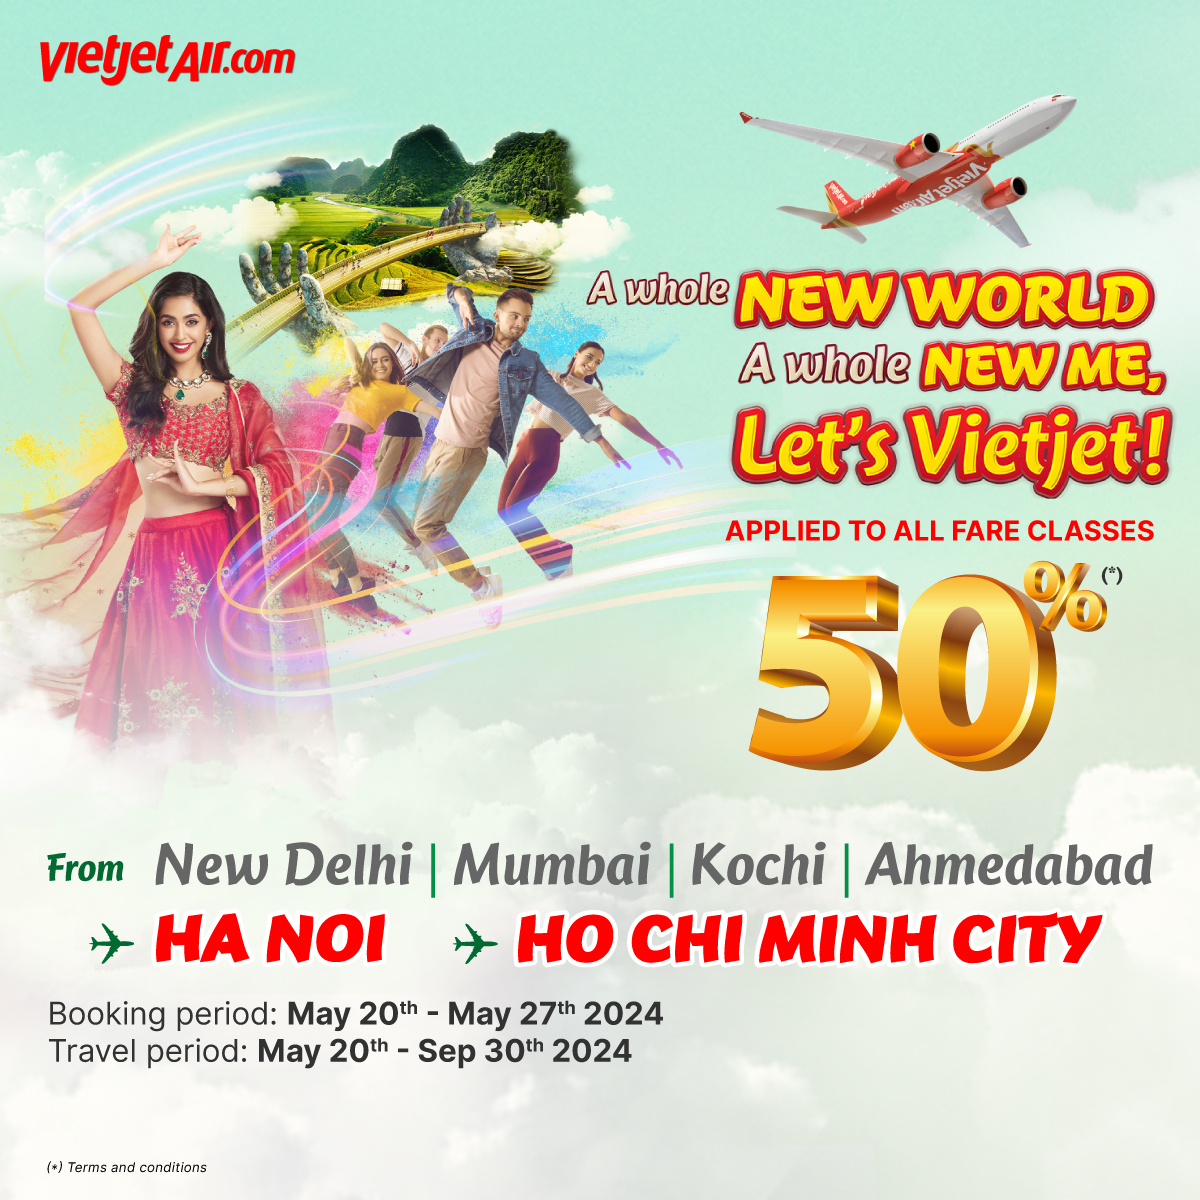 🏖️ Escape the Heat, Embrace Summer in Vietnam with Vietjet! ☀️ ✨ Discount 50% for two-way ticket 📅 Booking Period: May 20th - May 27th, 2024 🌏 Routes SG <-> BOM | New Delhi | Kochi | AMD HAN <-> BOM | DEL | AMD 🛫 Travel Period: May 20th - Sep 30th, 2024 #Vietjet #EnjoyFlying